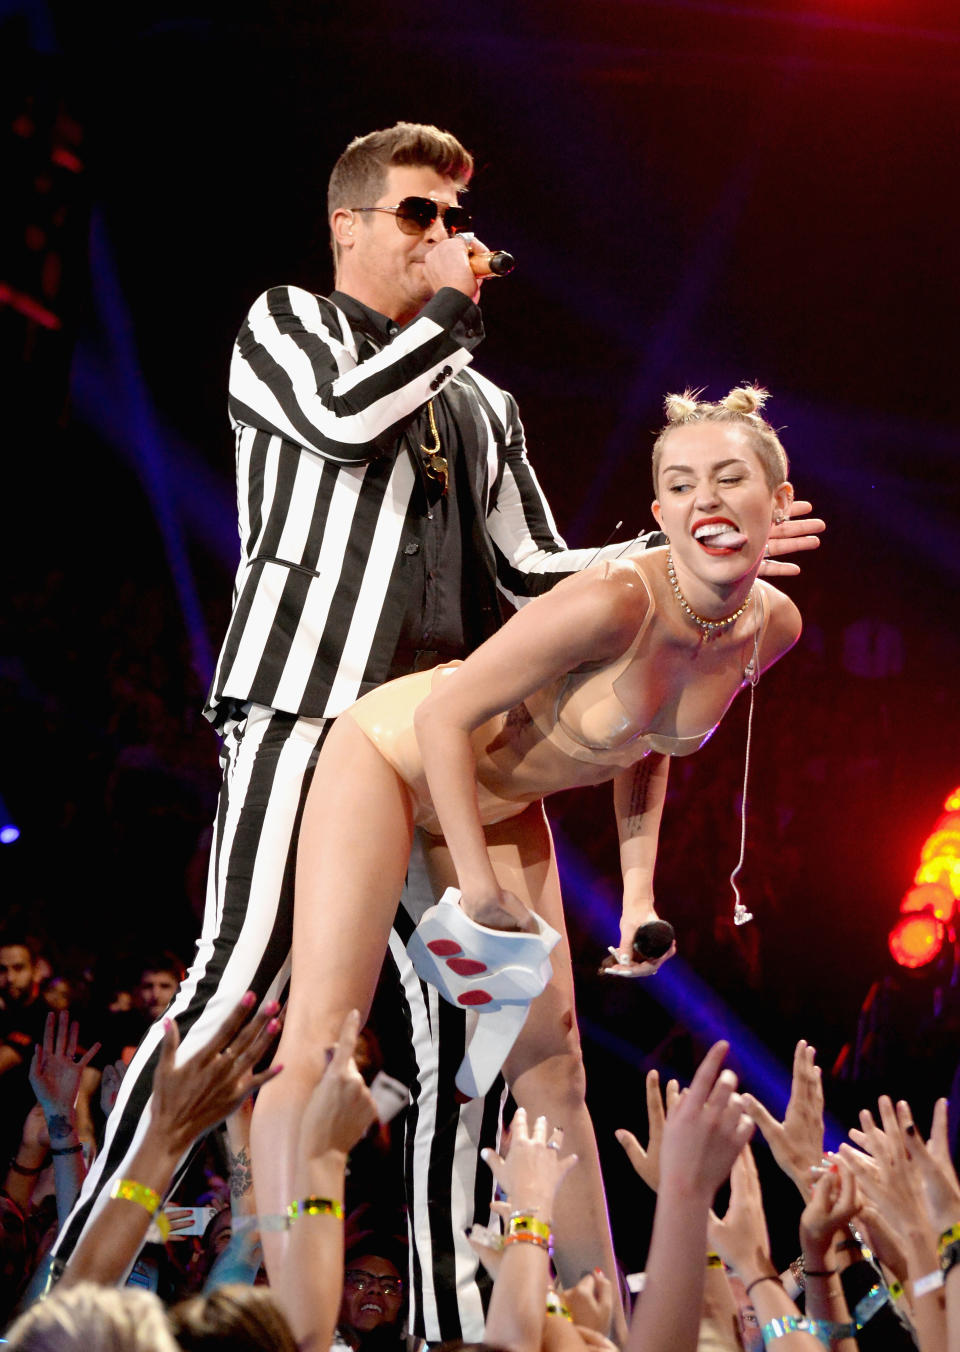 NEW YORK, NY - AUGUST 25:  Robin Thicke and Miley Cyrus perform during the 2013 MTV Video Music Awards at the Barclays Center on August 25, 2013 in the Brooklyn borough of New York City.  (Photo by Jeff Kravitz/FilmMagic for MTV)